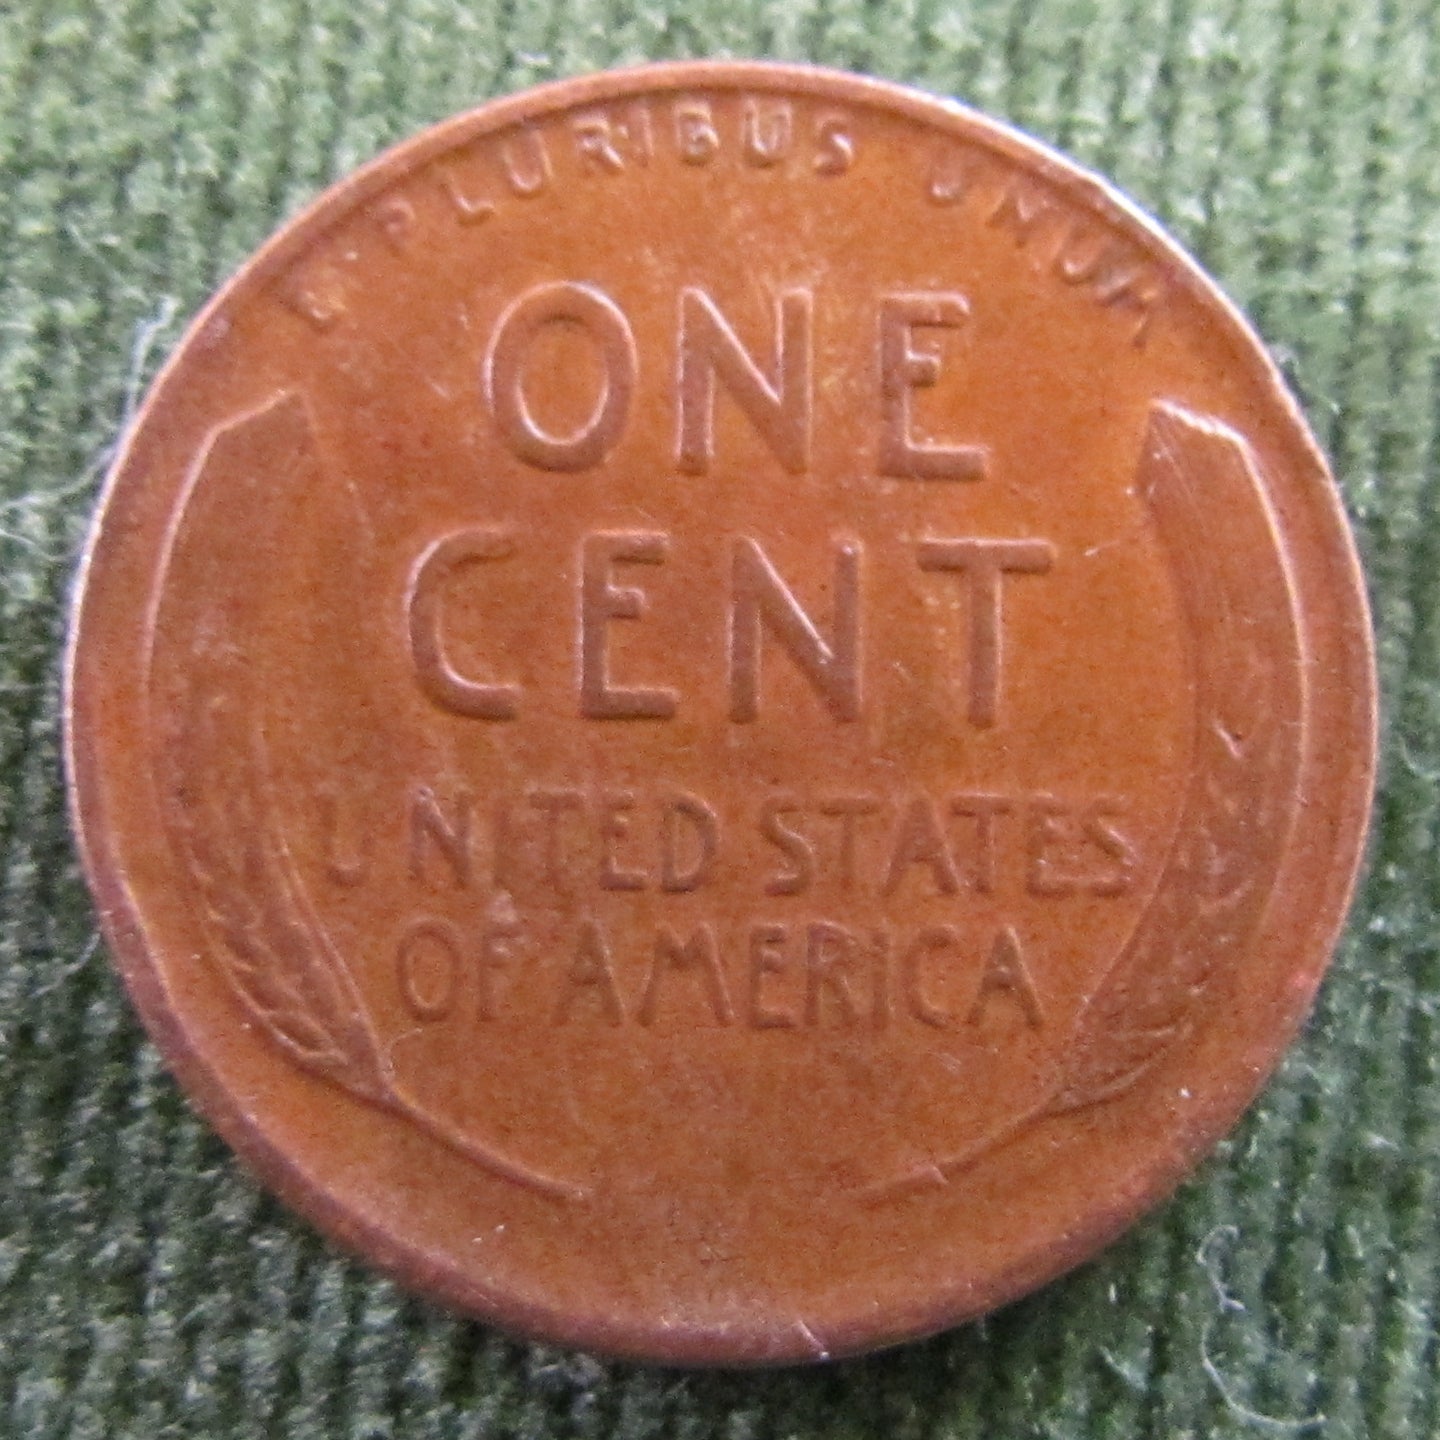 USA American 1934 1 Cent Wheat Lincoln Coin - Circulated